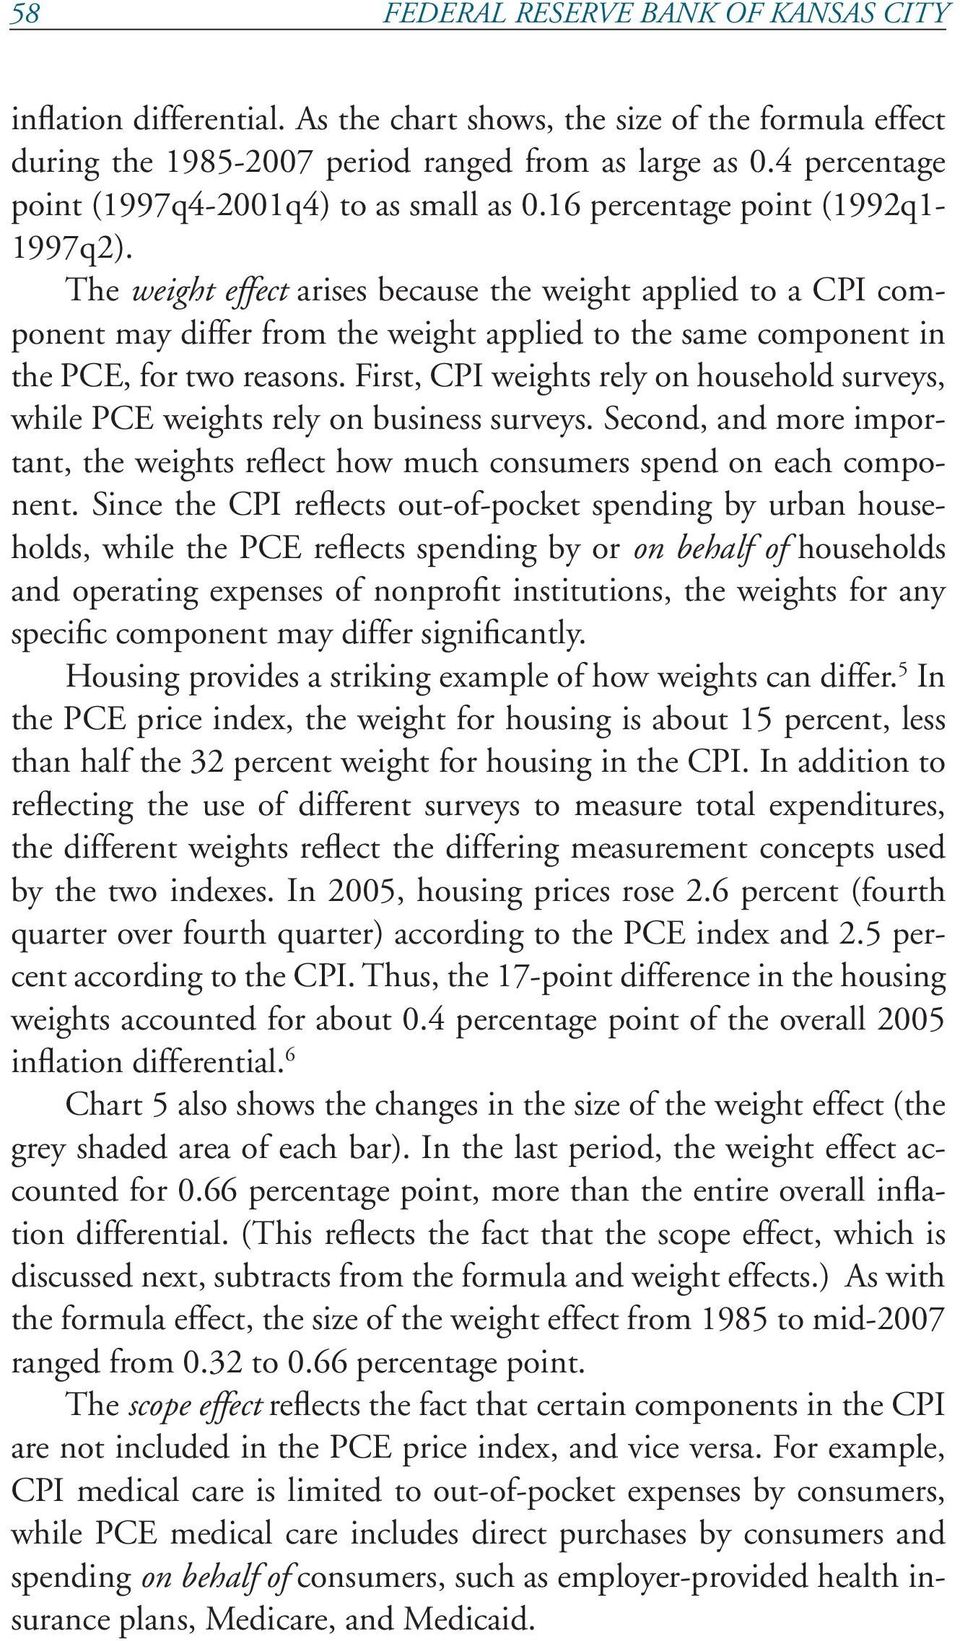 The weight effect arises because the weight applied to a CPI component may differ from the weight applied to the same component in the PCE, for two reasons.